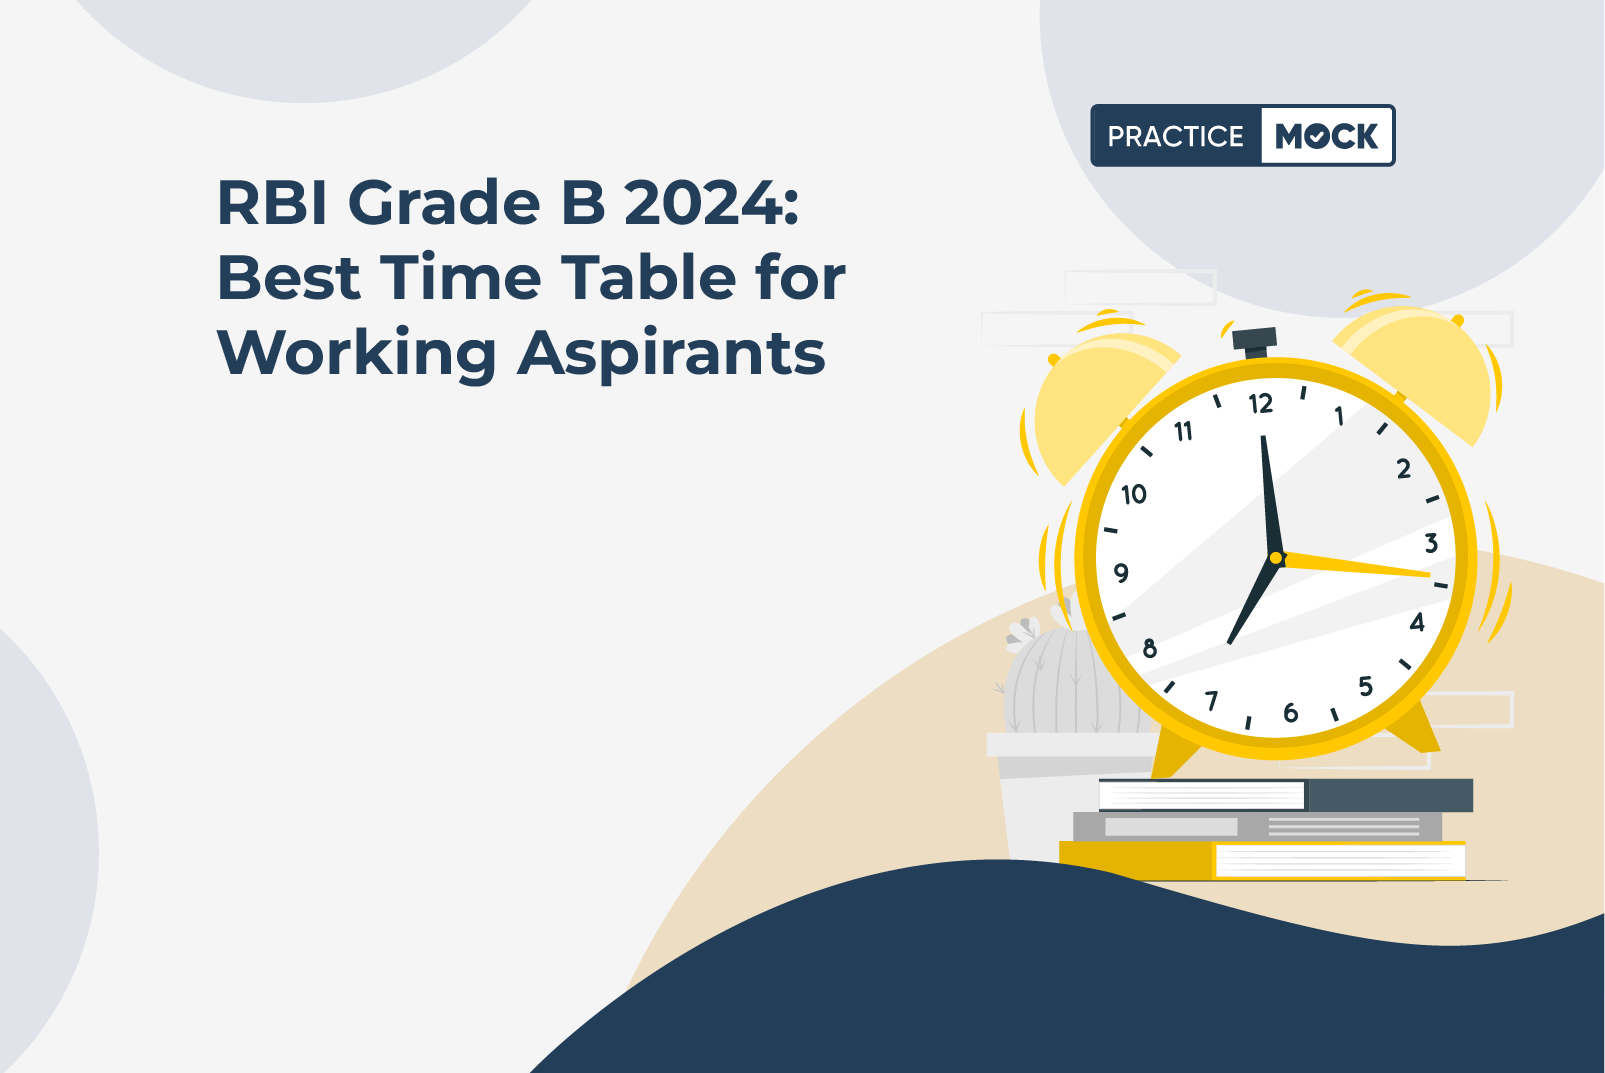 RBI Grade B 2024 Best Time Table for Working Aspirants